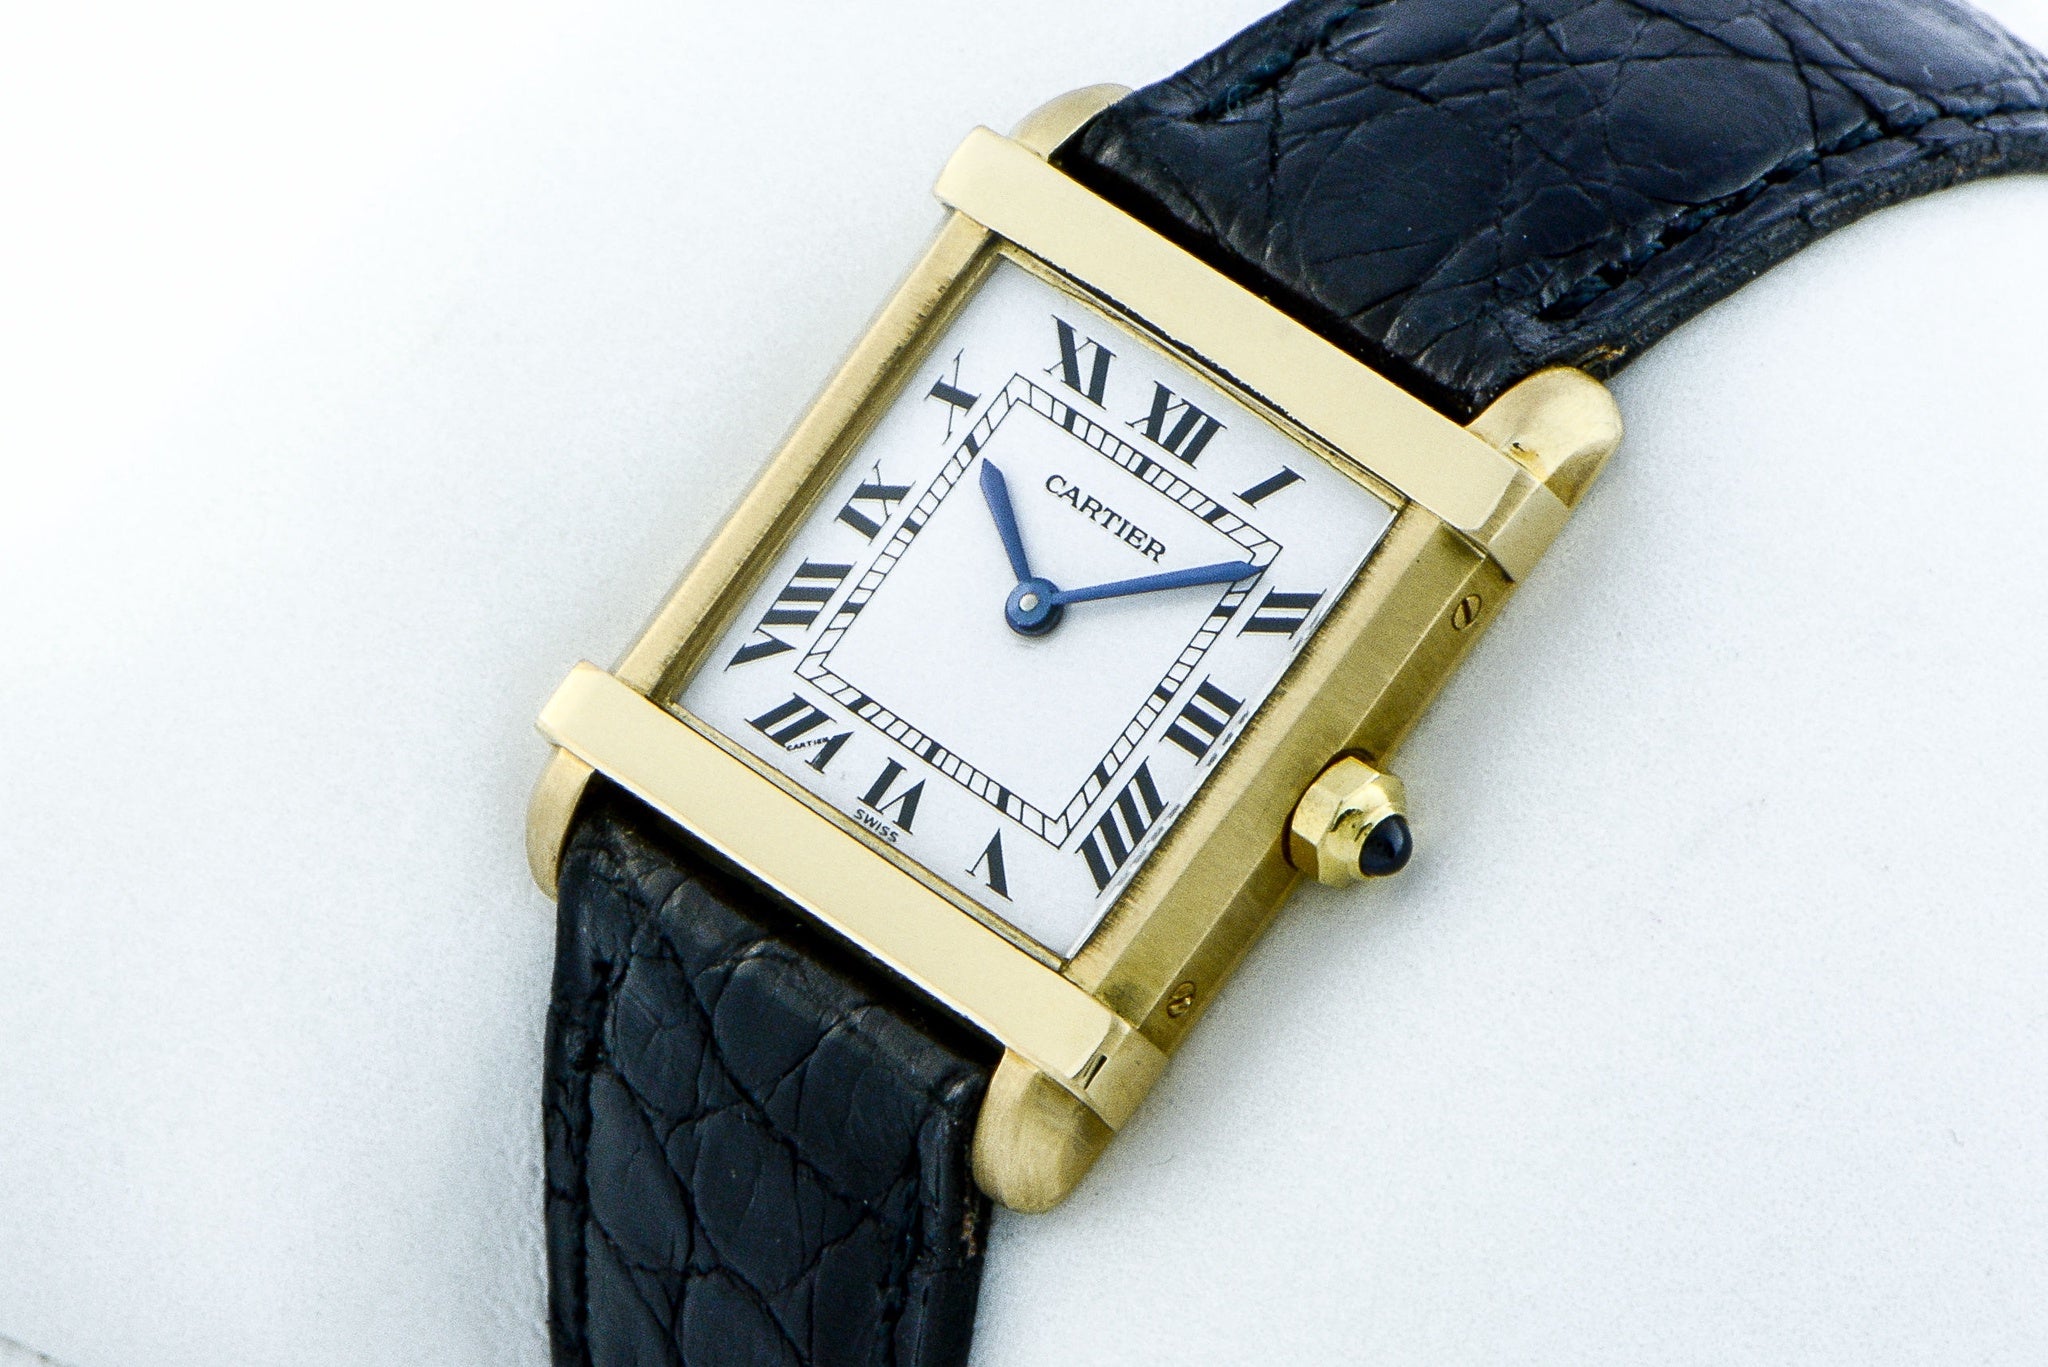 CARTIER Tank Chinoise 750 Montre dame 